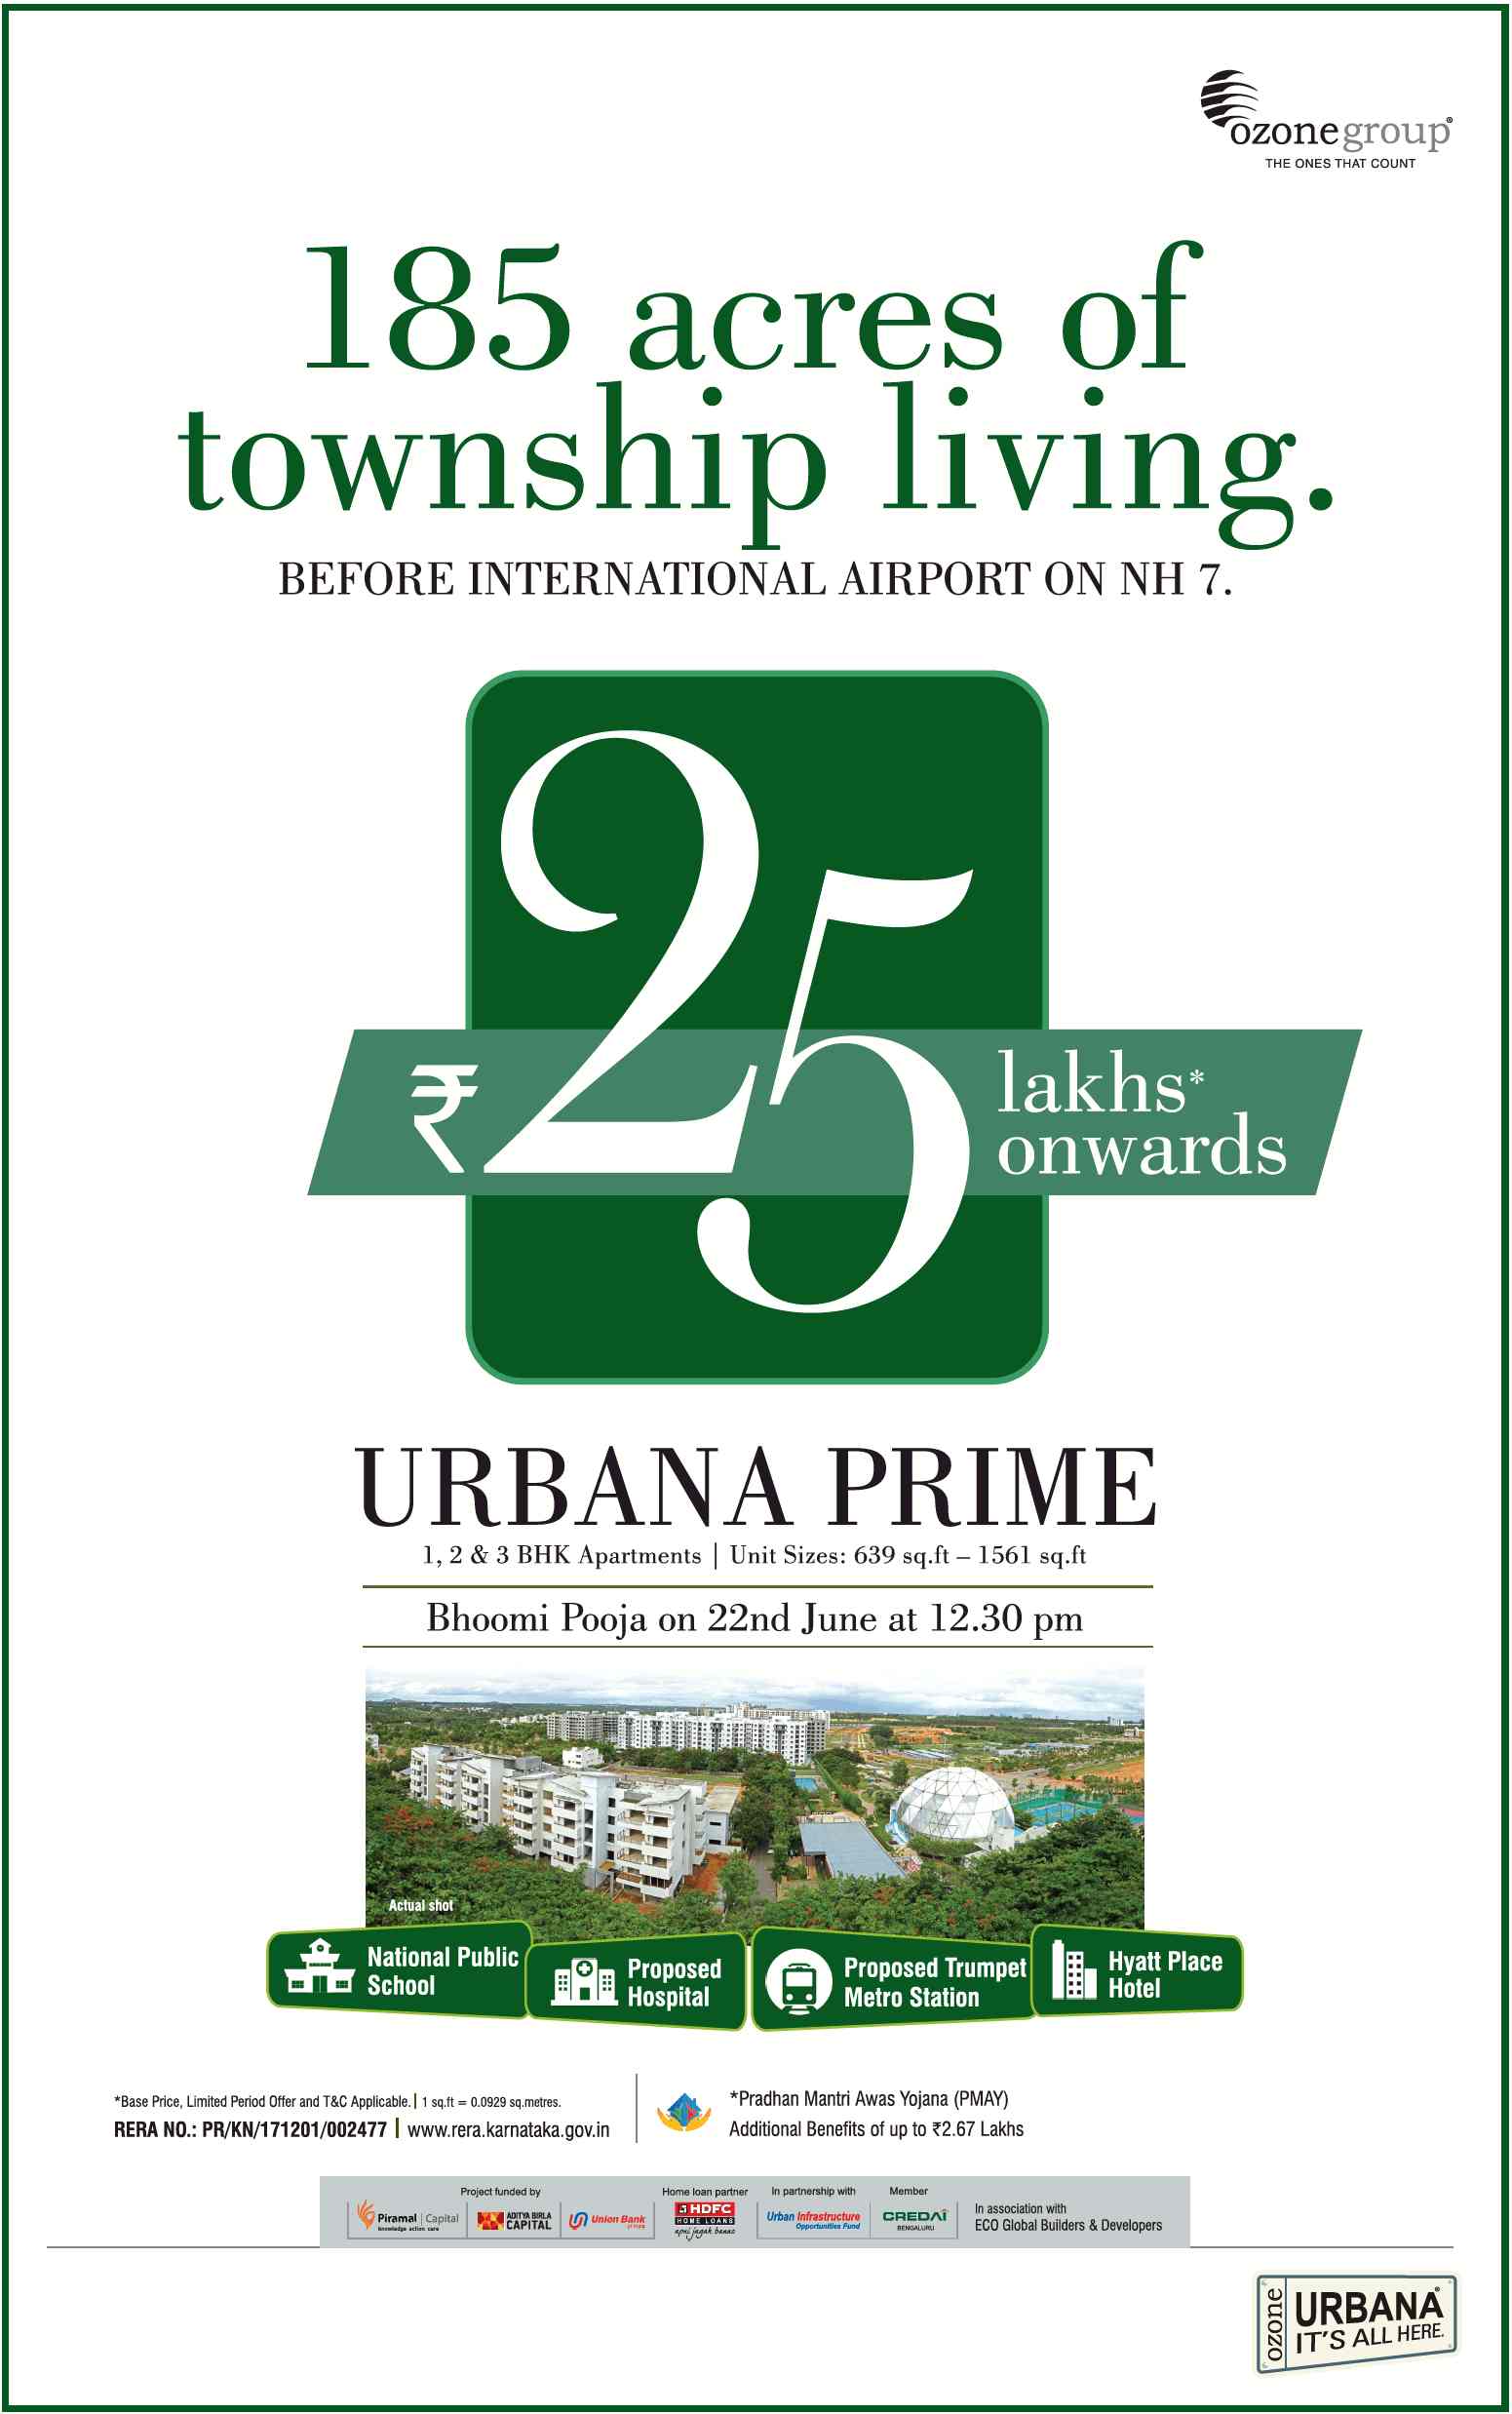 Book 1, 2 & 3 BHK apartments starting from Rs. 25 lakhs onwards at Ozone Urbana Prime in Bangalore